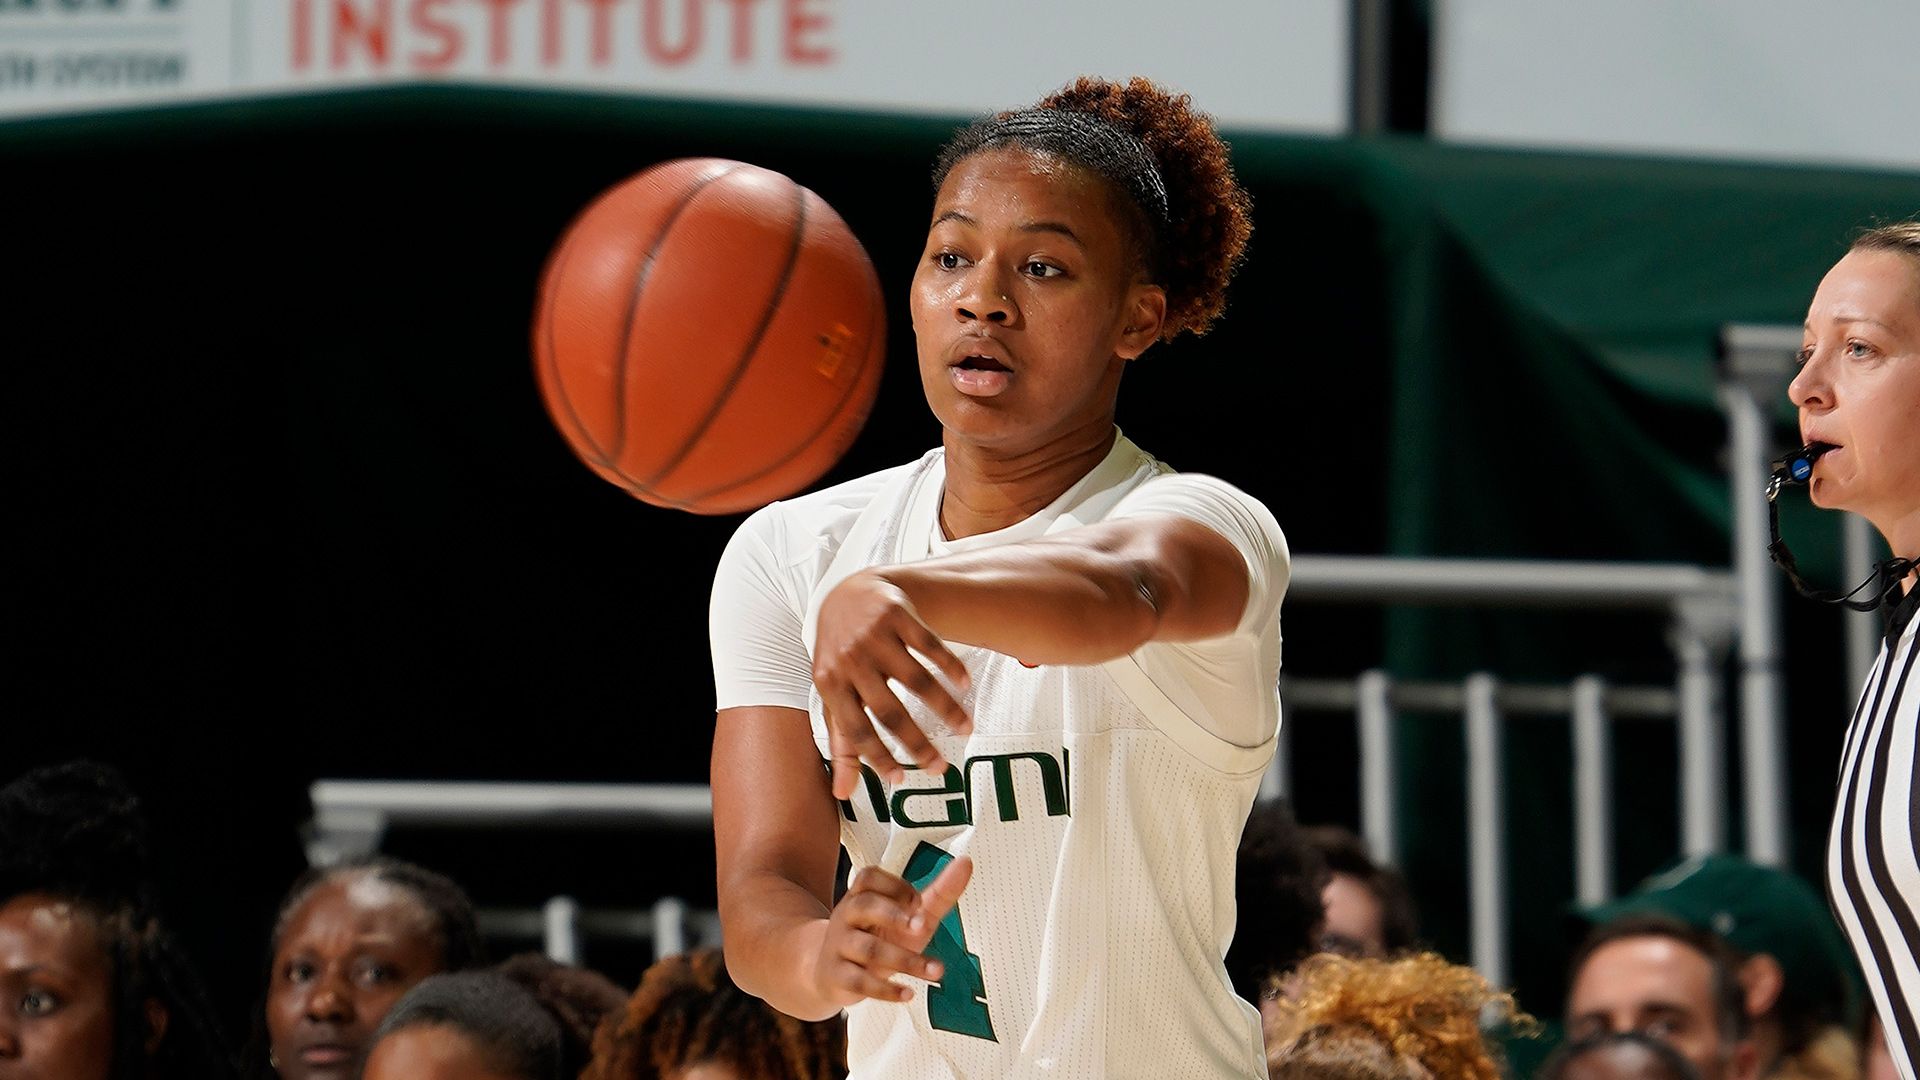 Canes Close Out January At Home